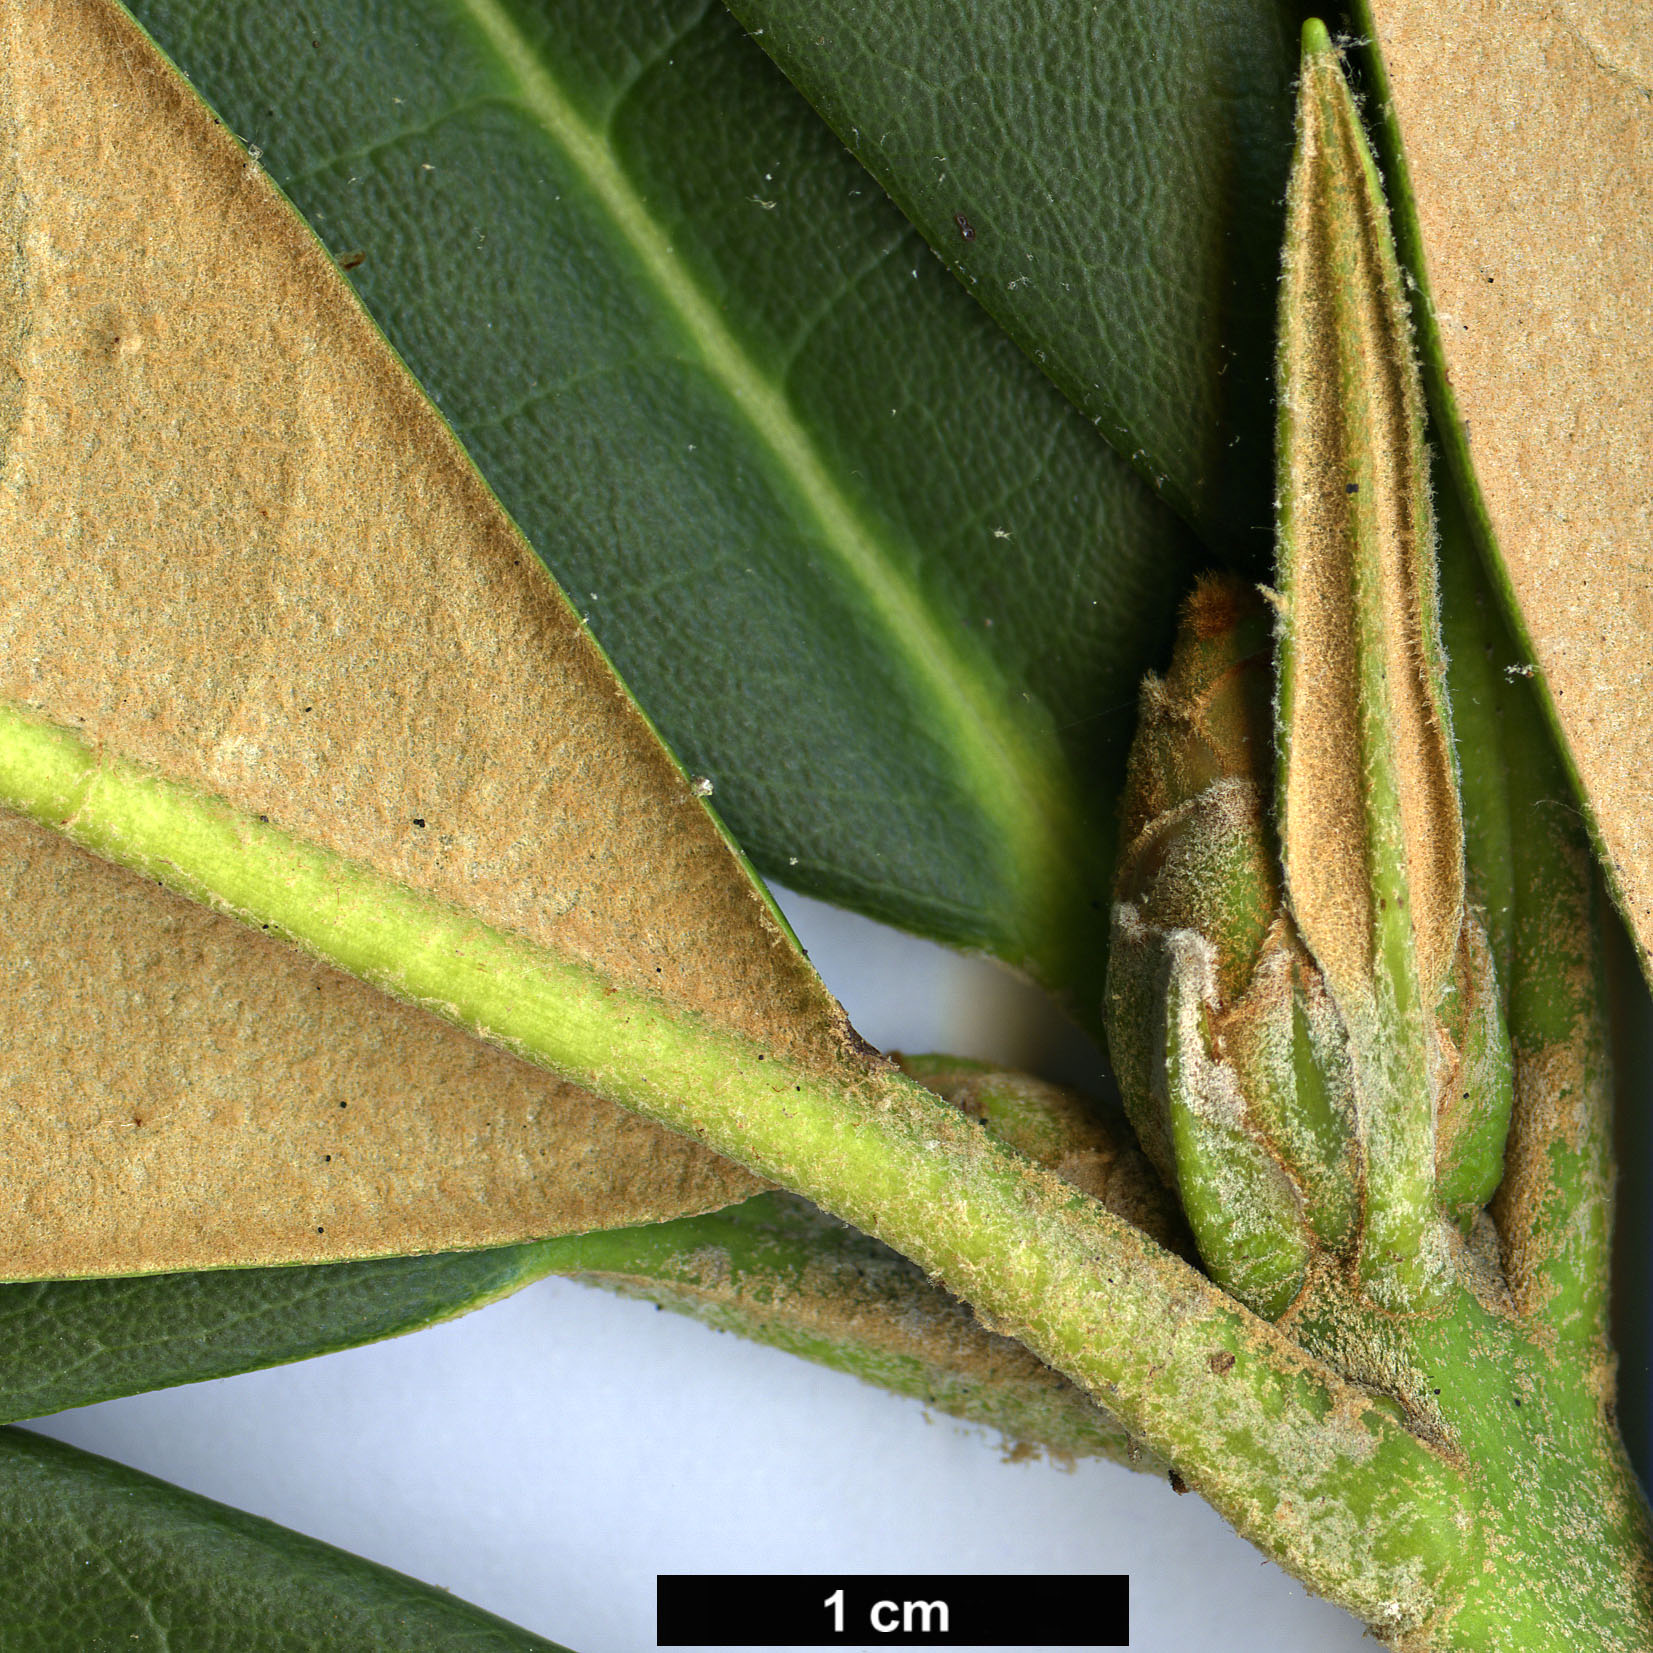 High resolution image: Family: Ericaceae - Genus: Rhododendron - Taxon: niveum